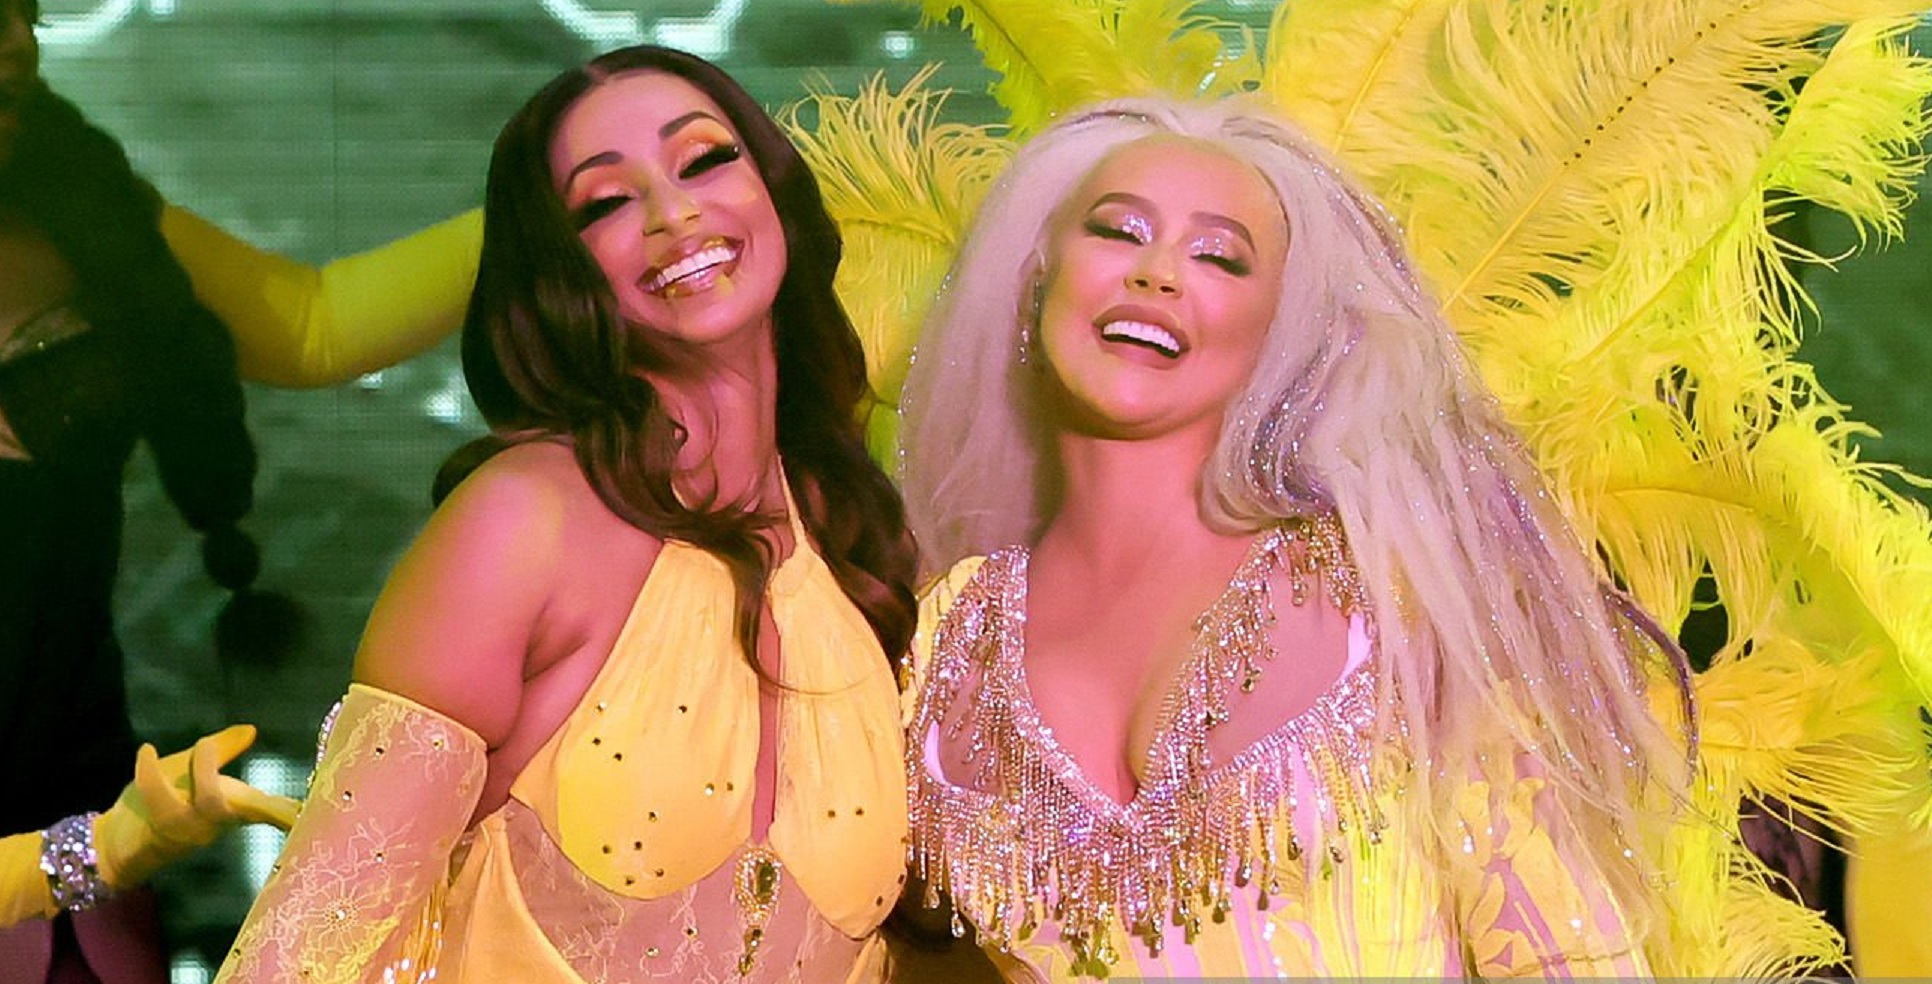 Watch: Christina Aguilera Sets The Stage On Fire With ‘Lady Marmalade’ Performance, Invites Mya To Join With Her